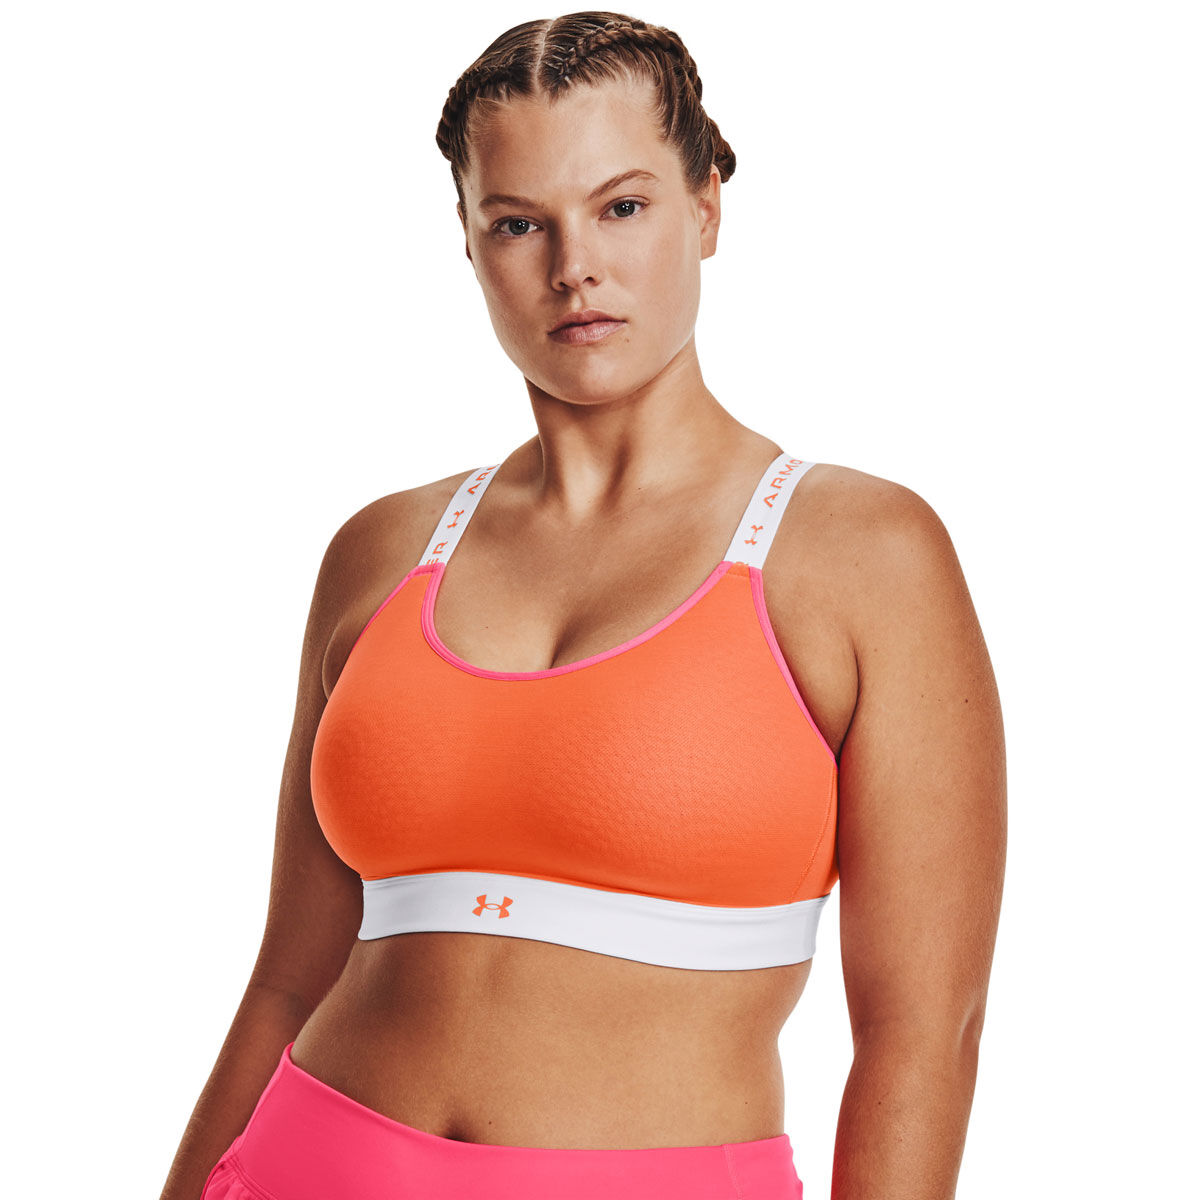 RUNNING BARE WMNS SAY NAME SPORTS BRA - Totally Sports & Surf